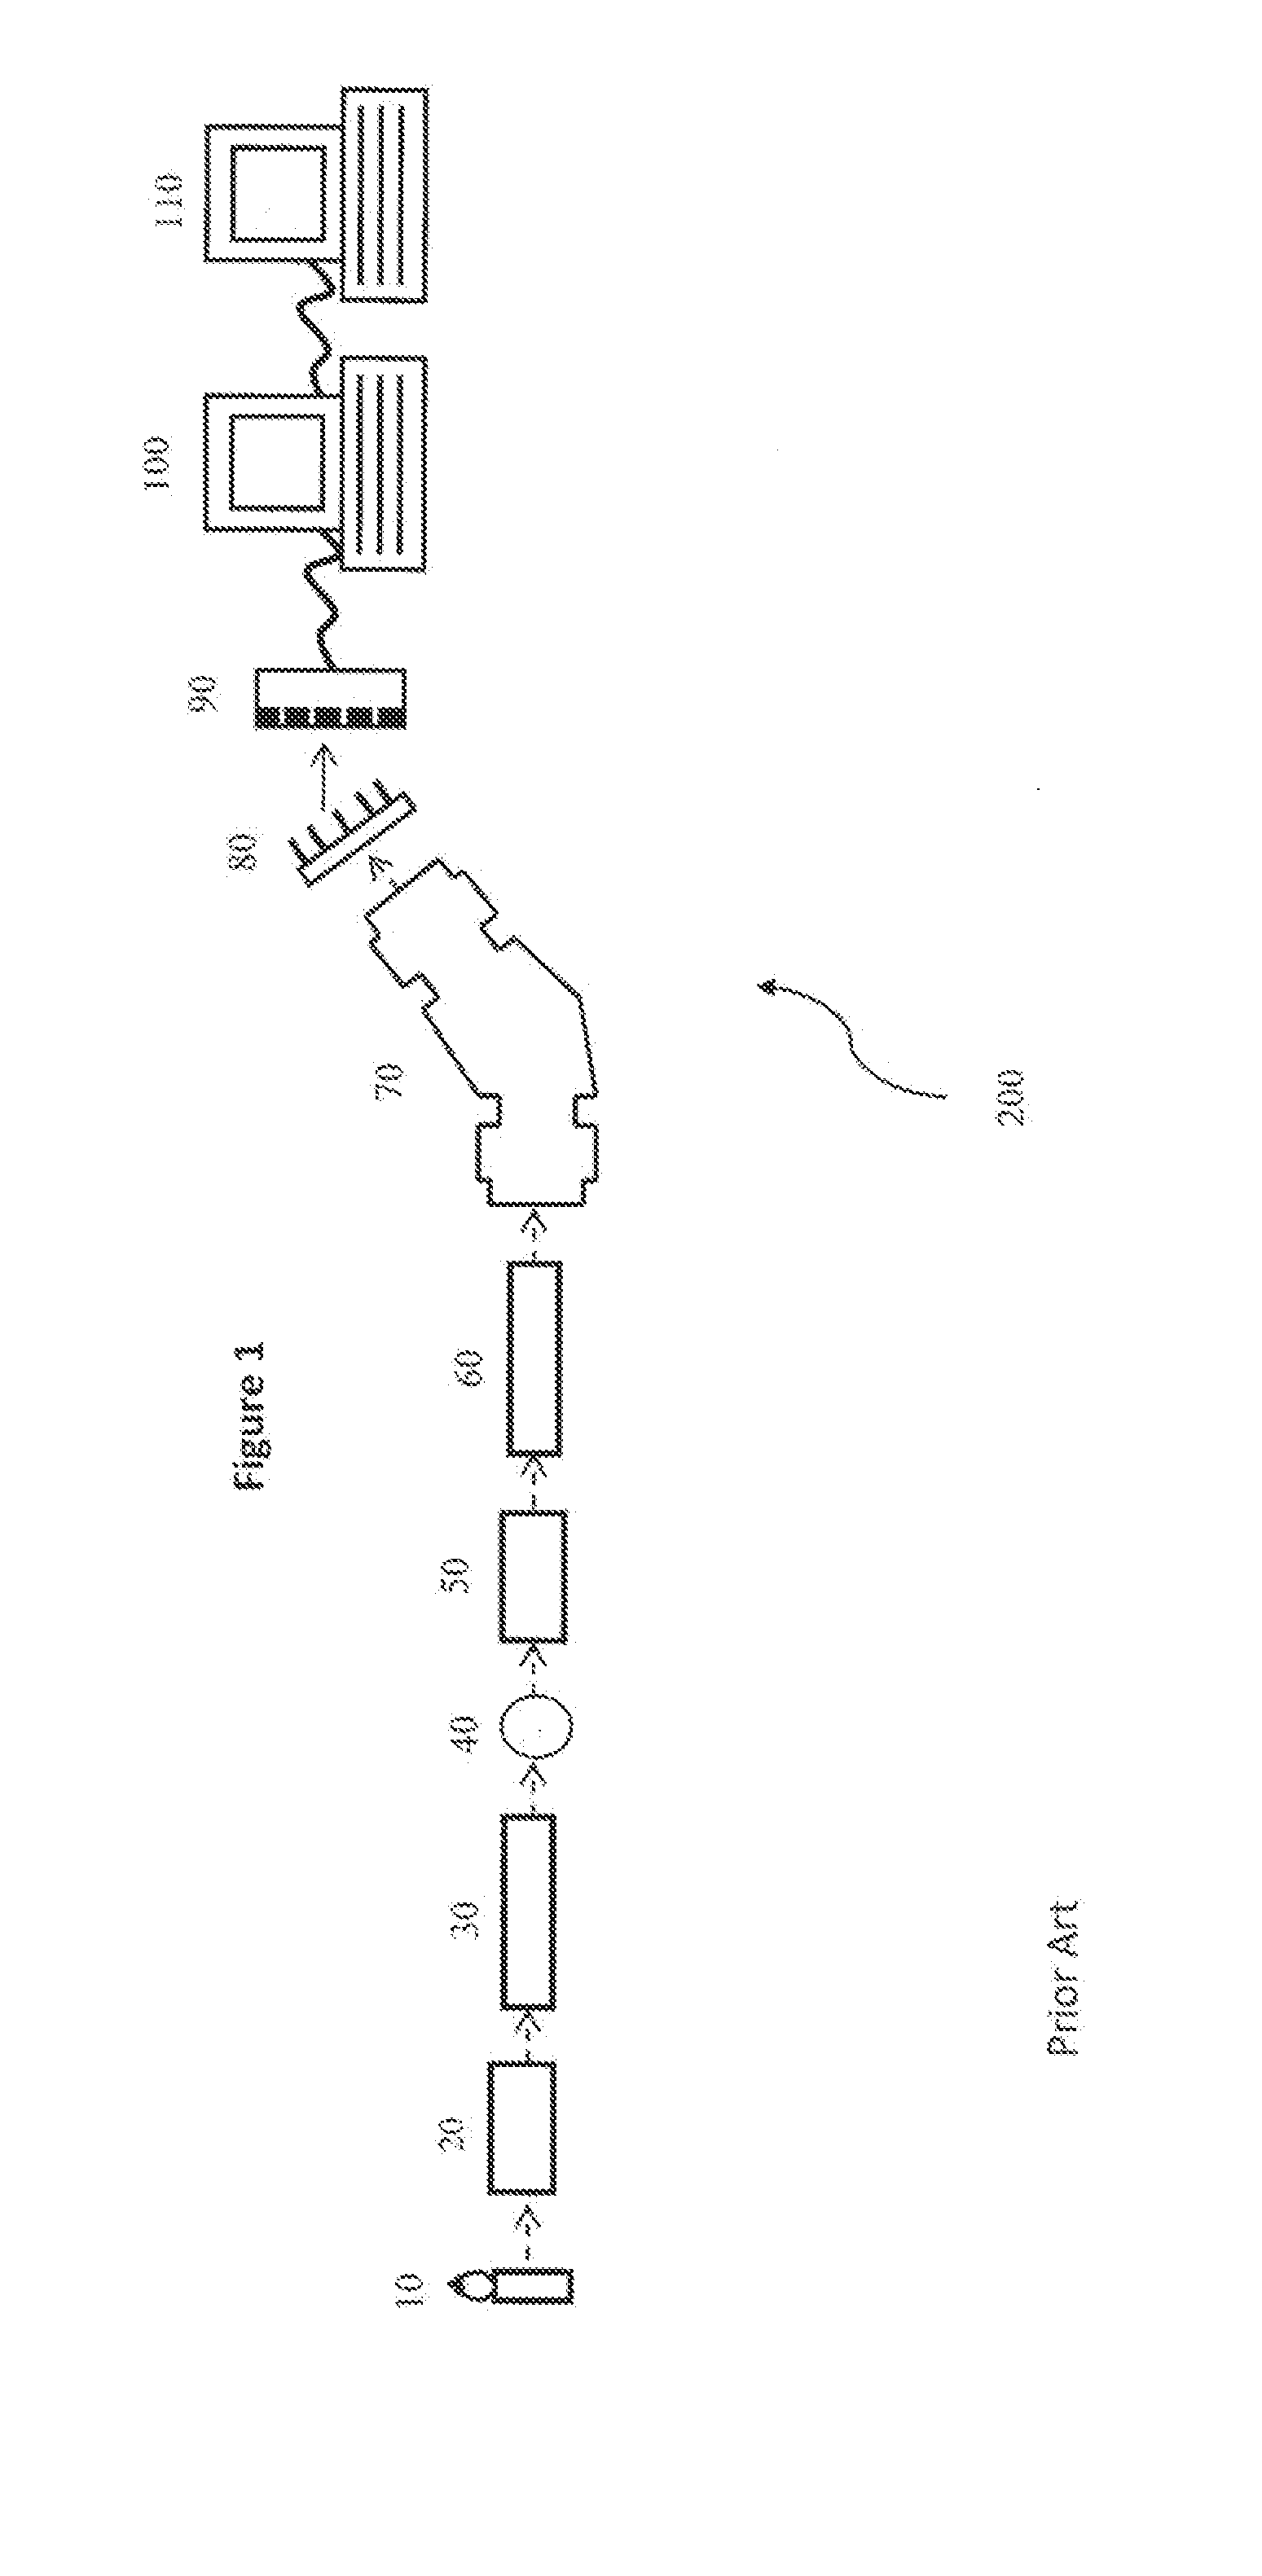 Apparatus and method for optimizing data capture and data correction for spectroscopic analysis